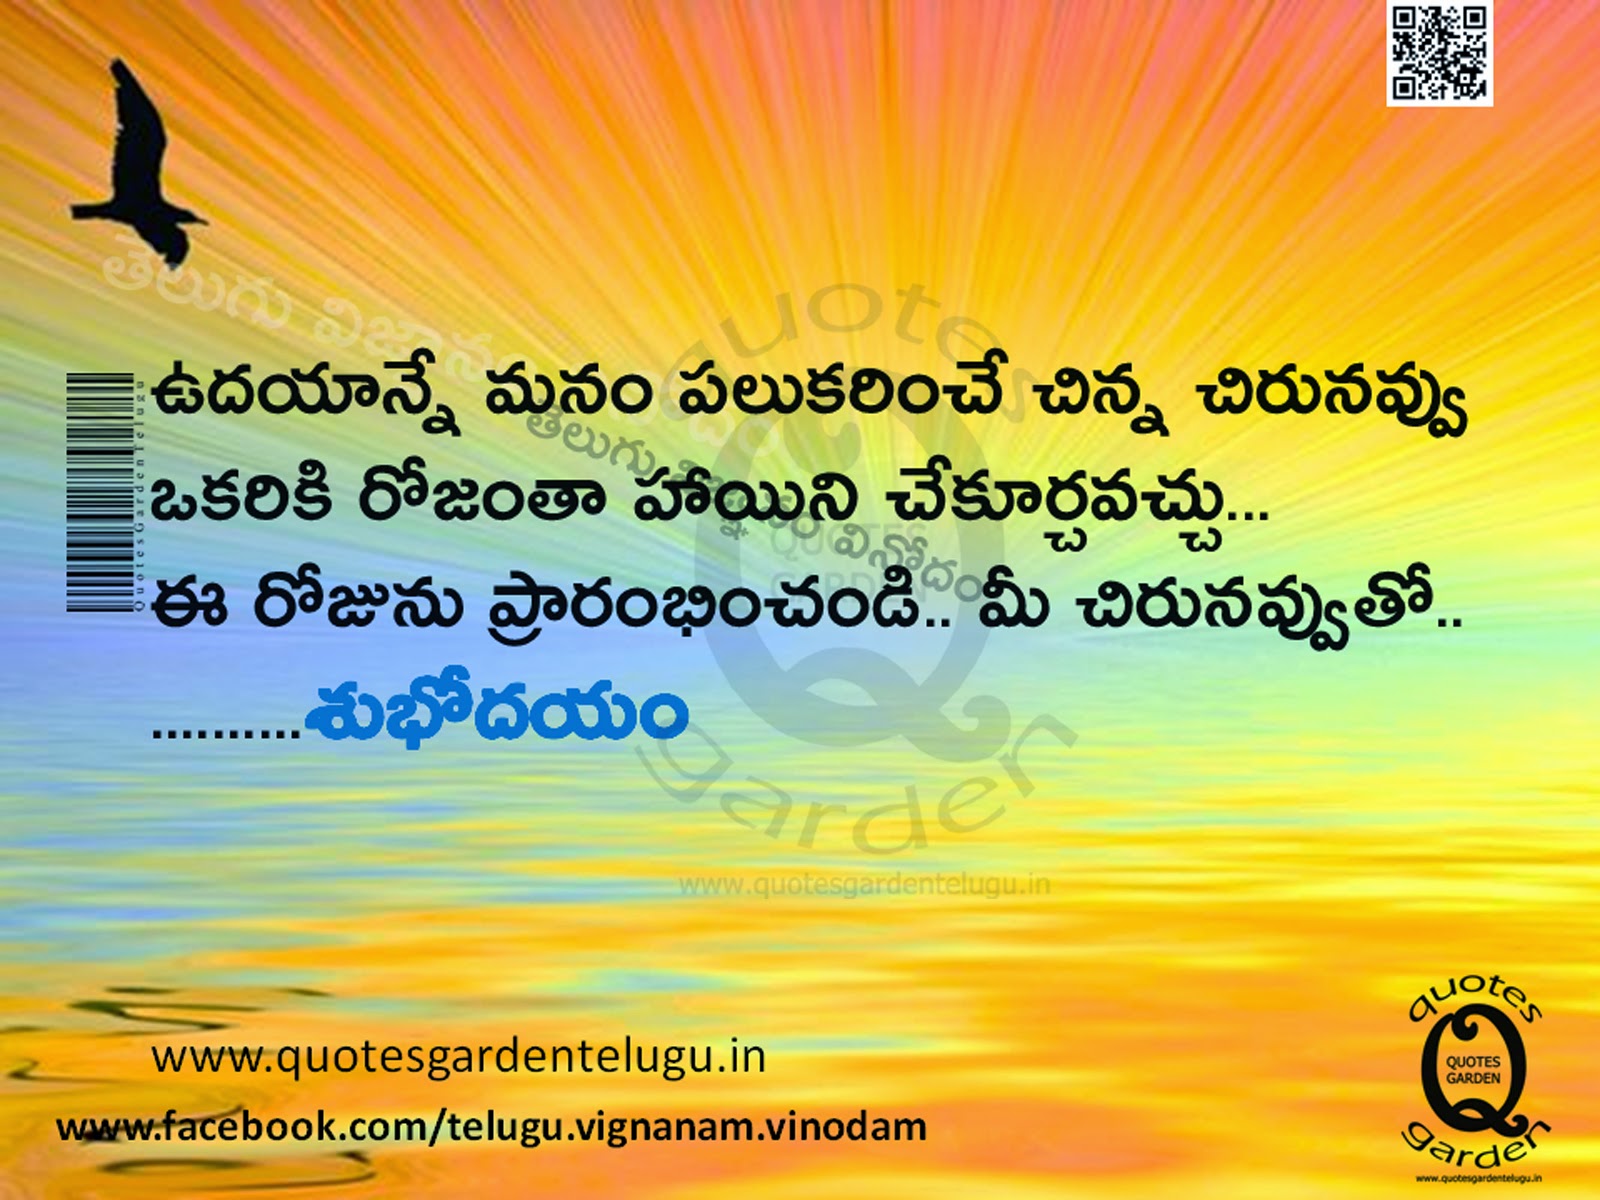 Good morning quotes - inspirational Life Quotes with beautiful awesome images in telugu